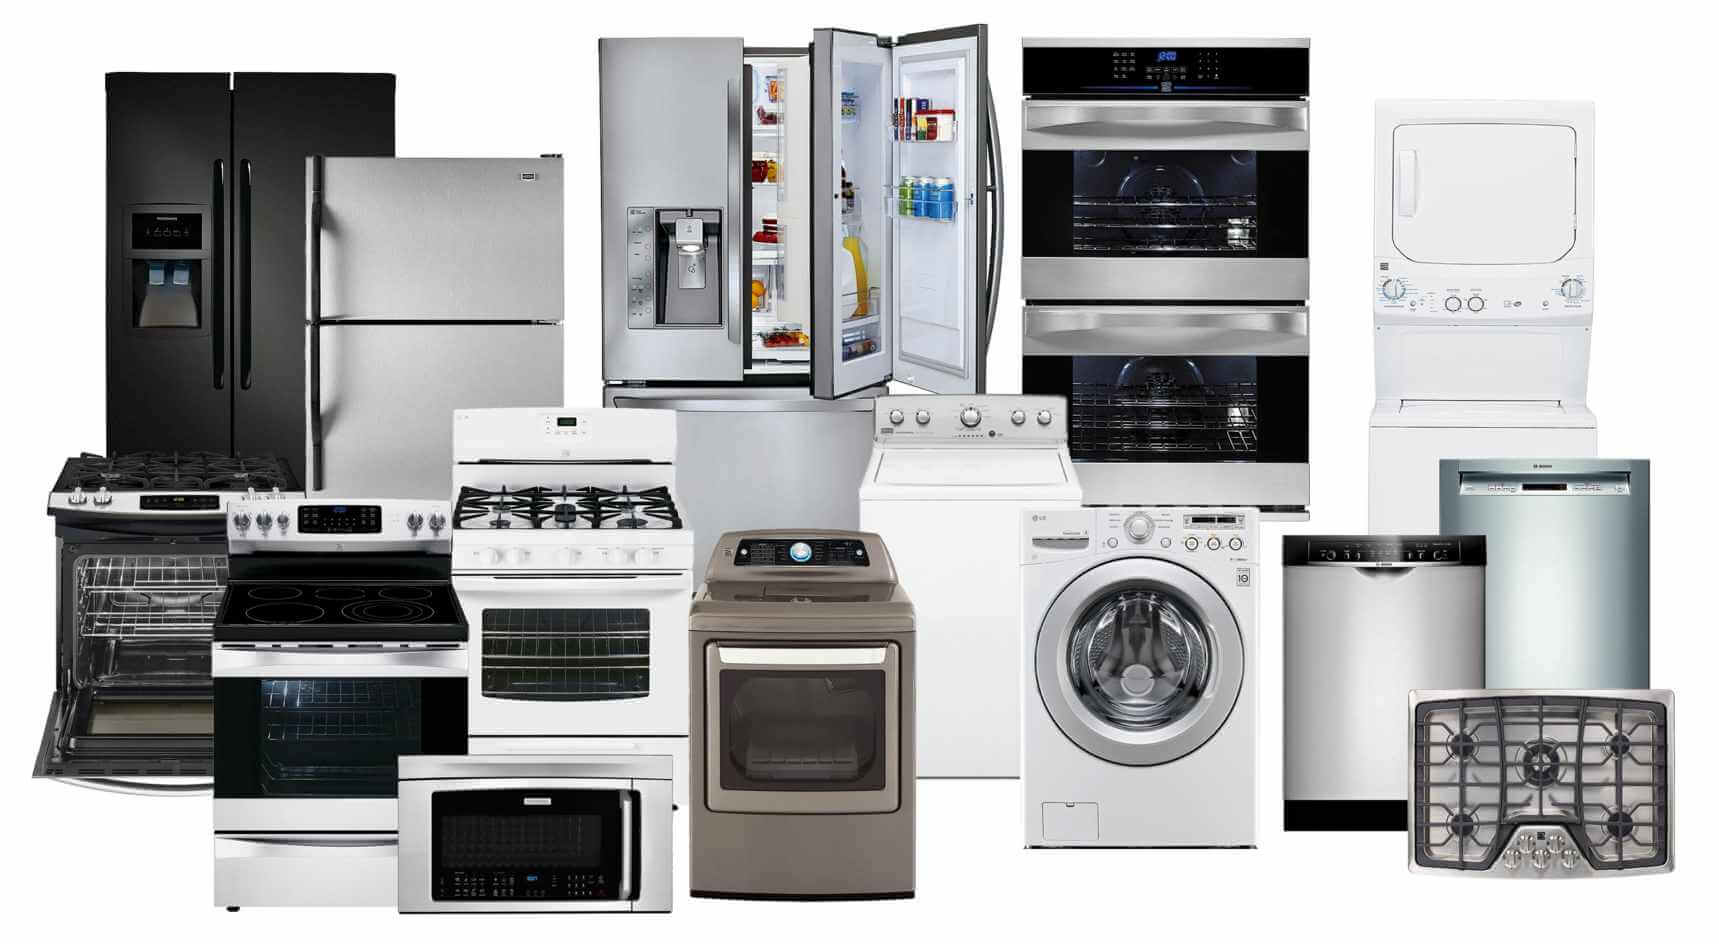 Maytag Washer Repair Technician, Maytag In Home Washer Repair